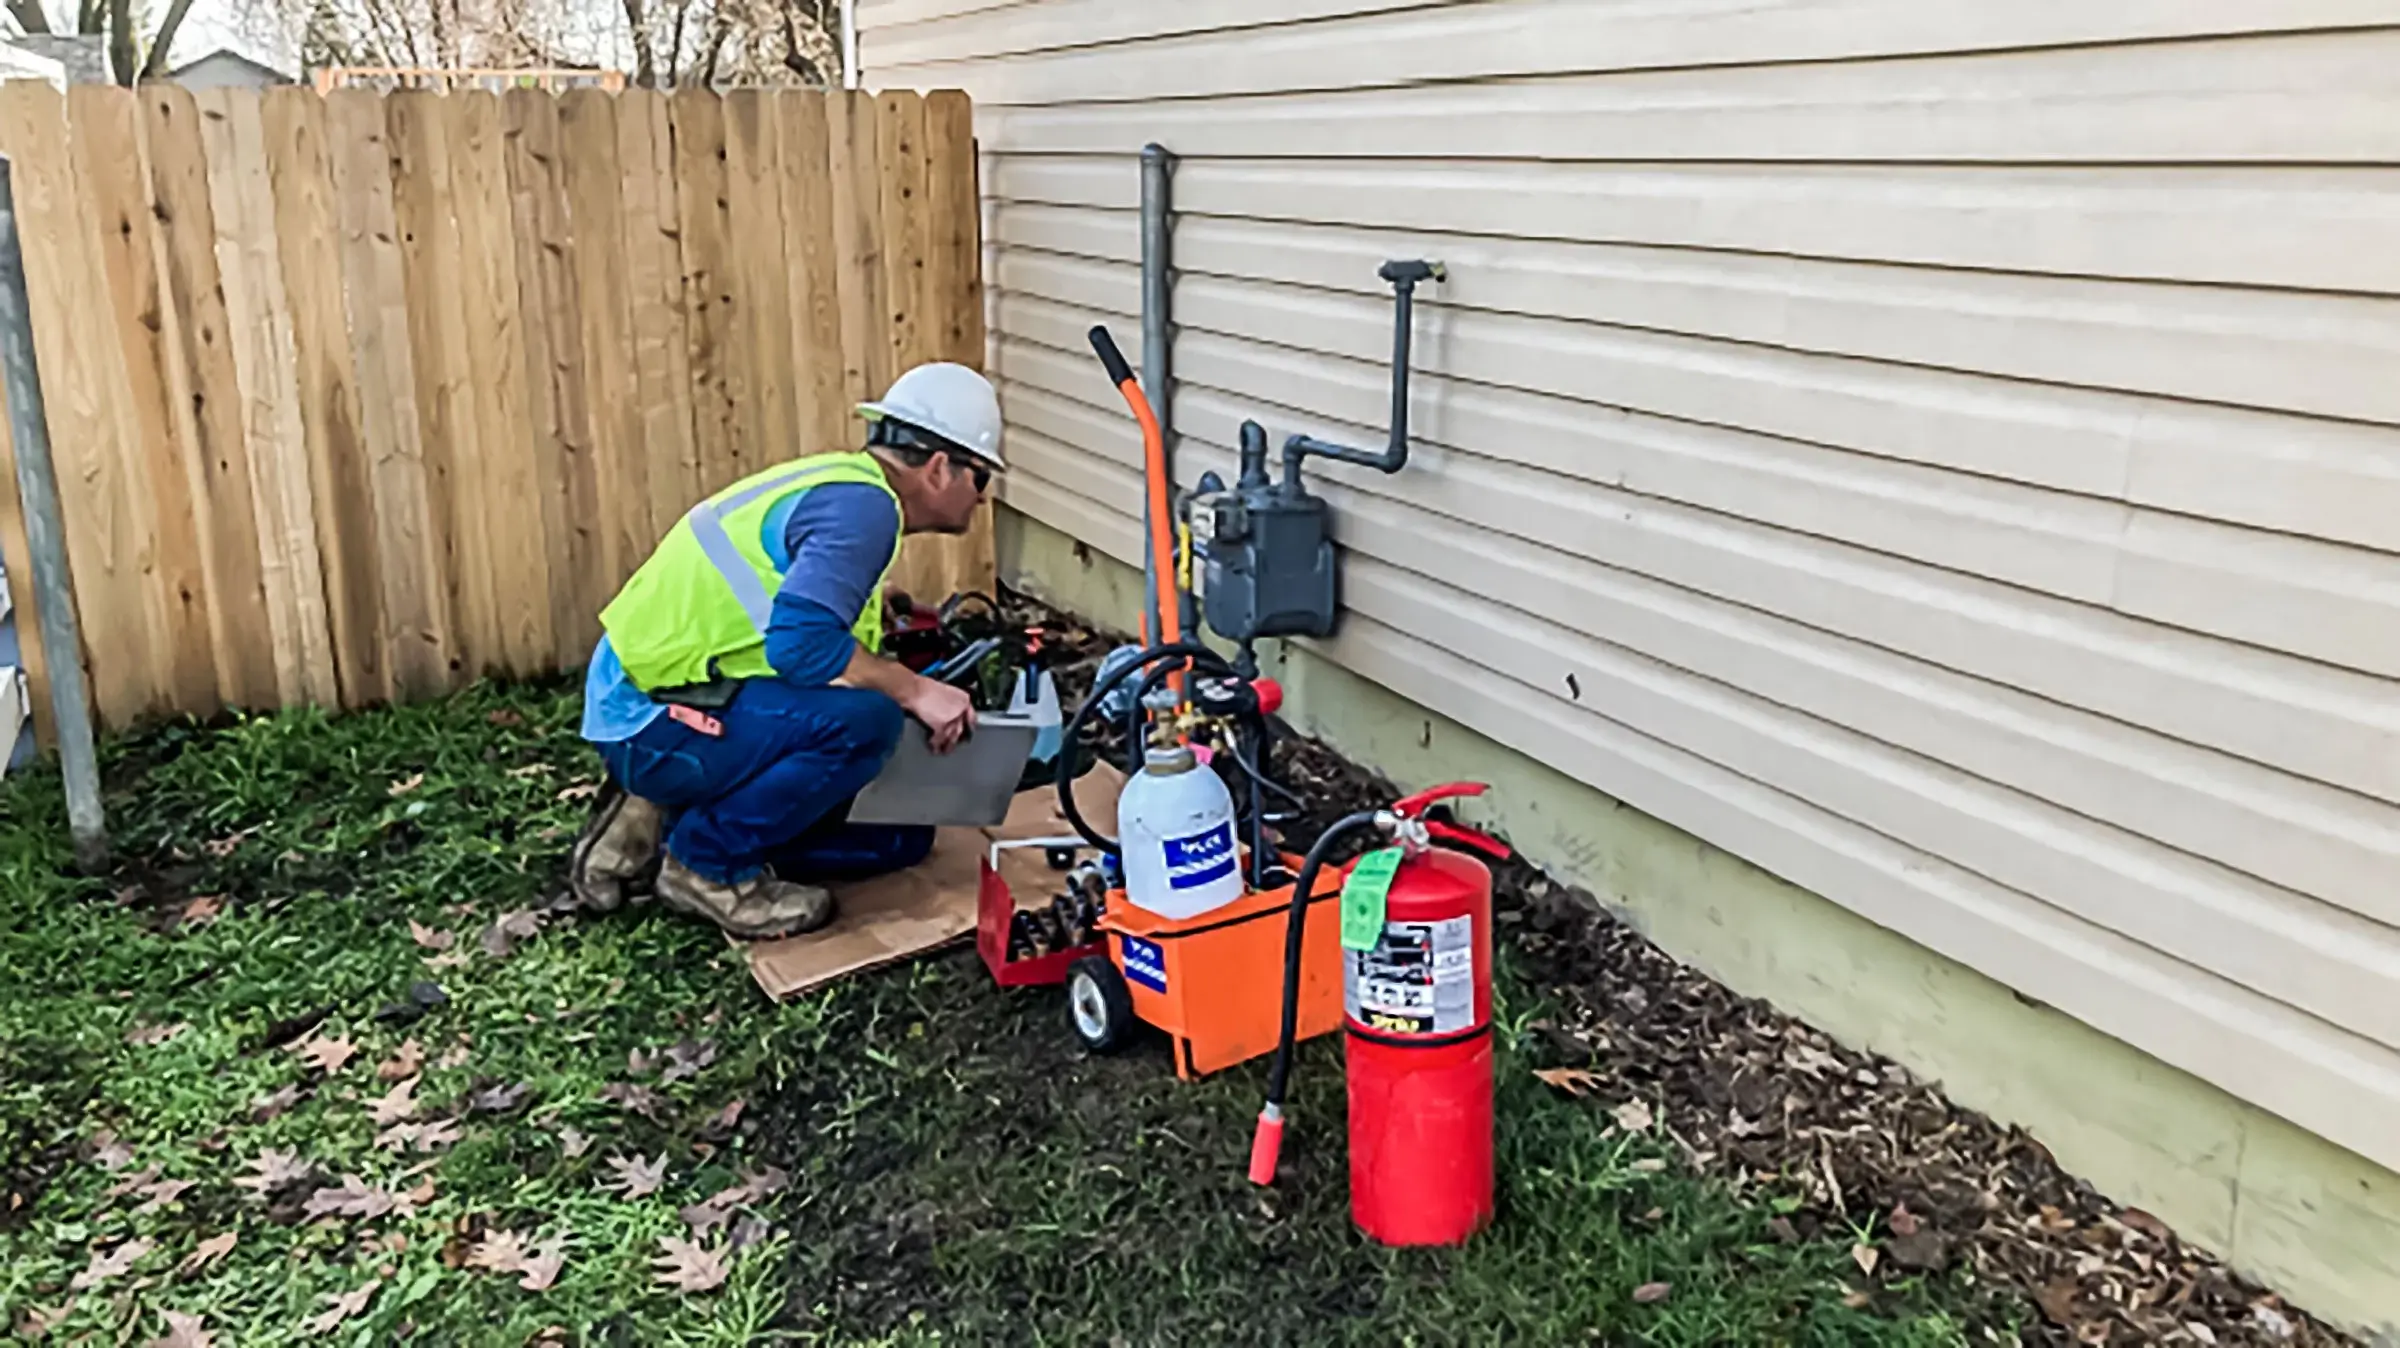 A worker inspects a utility meter on the side of a home